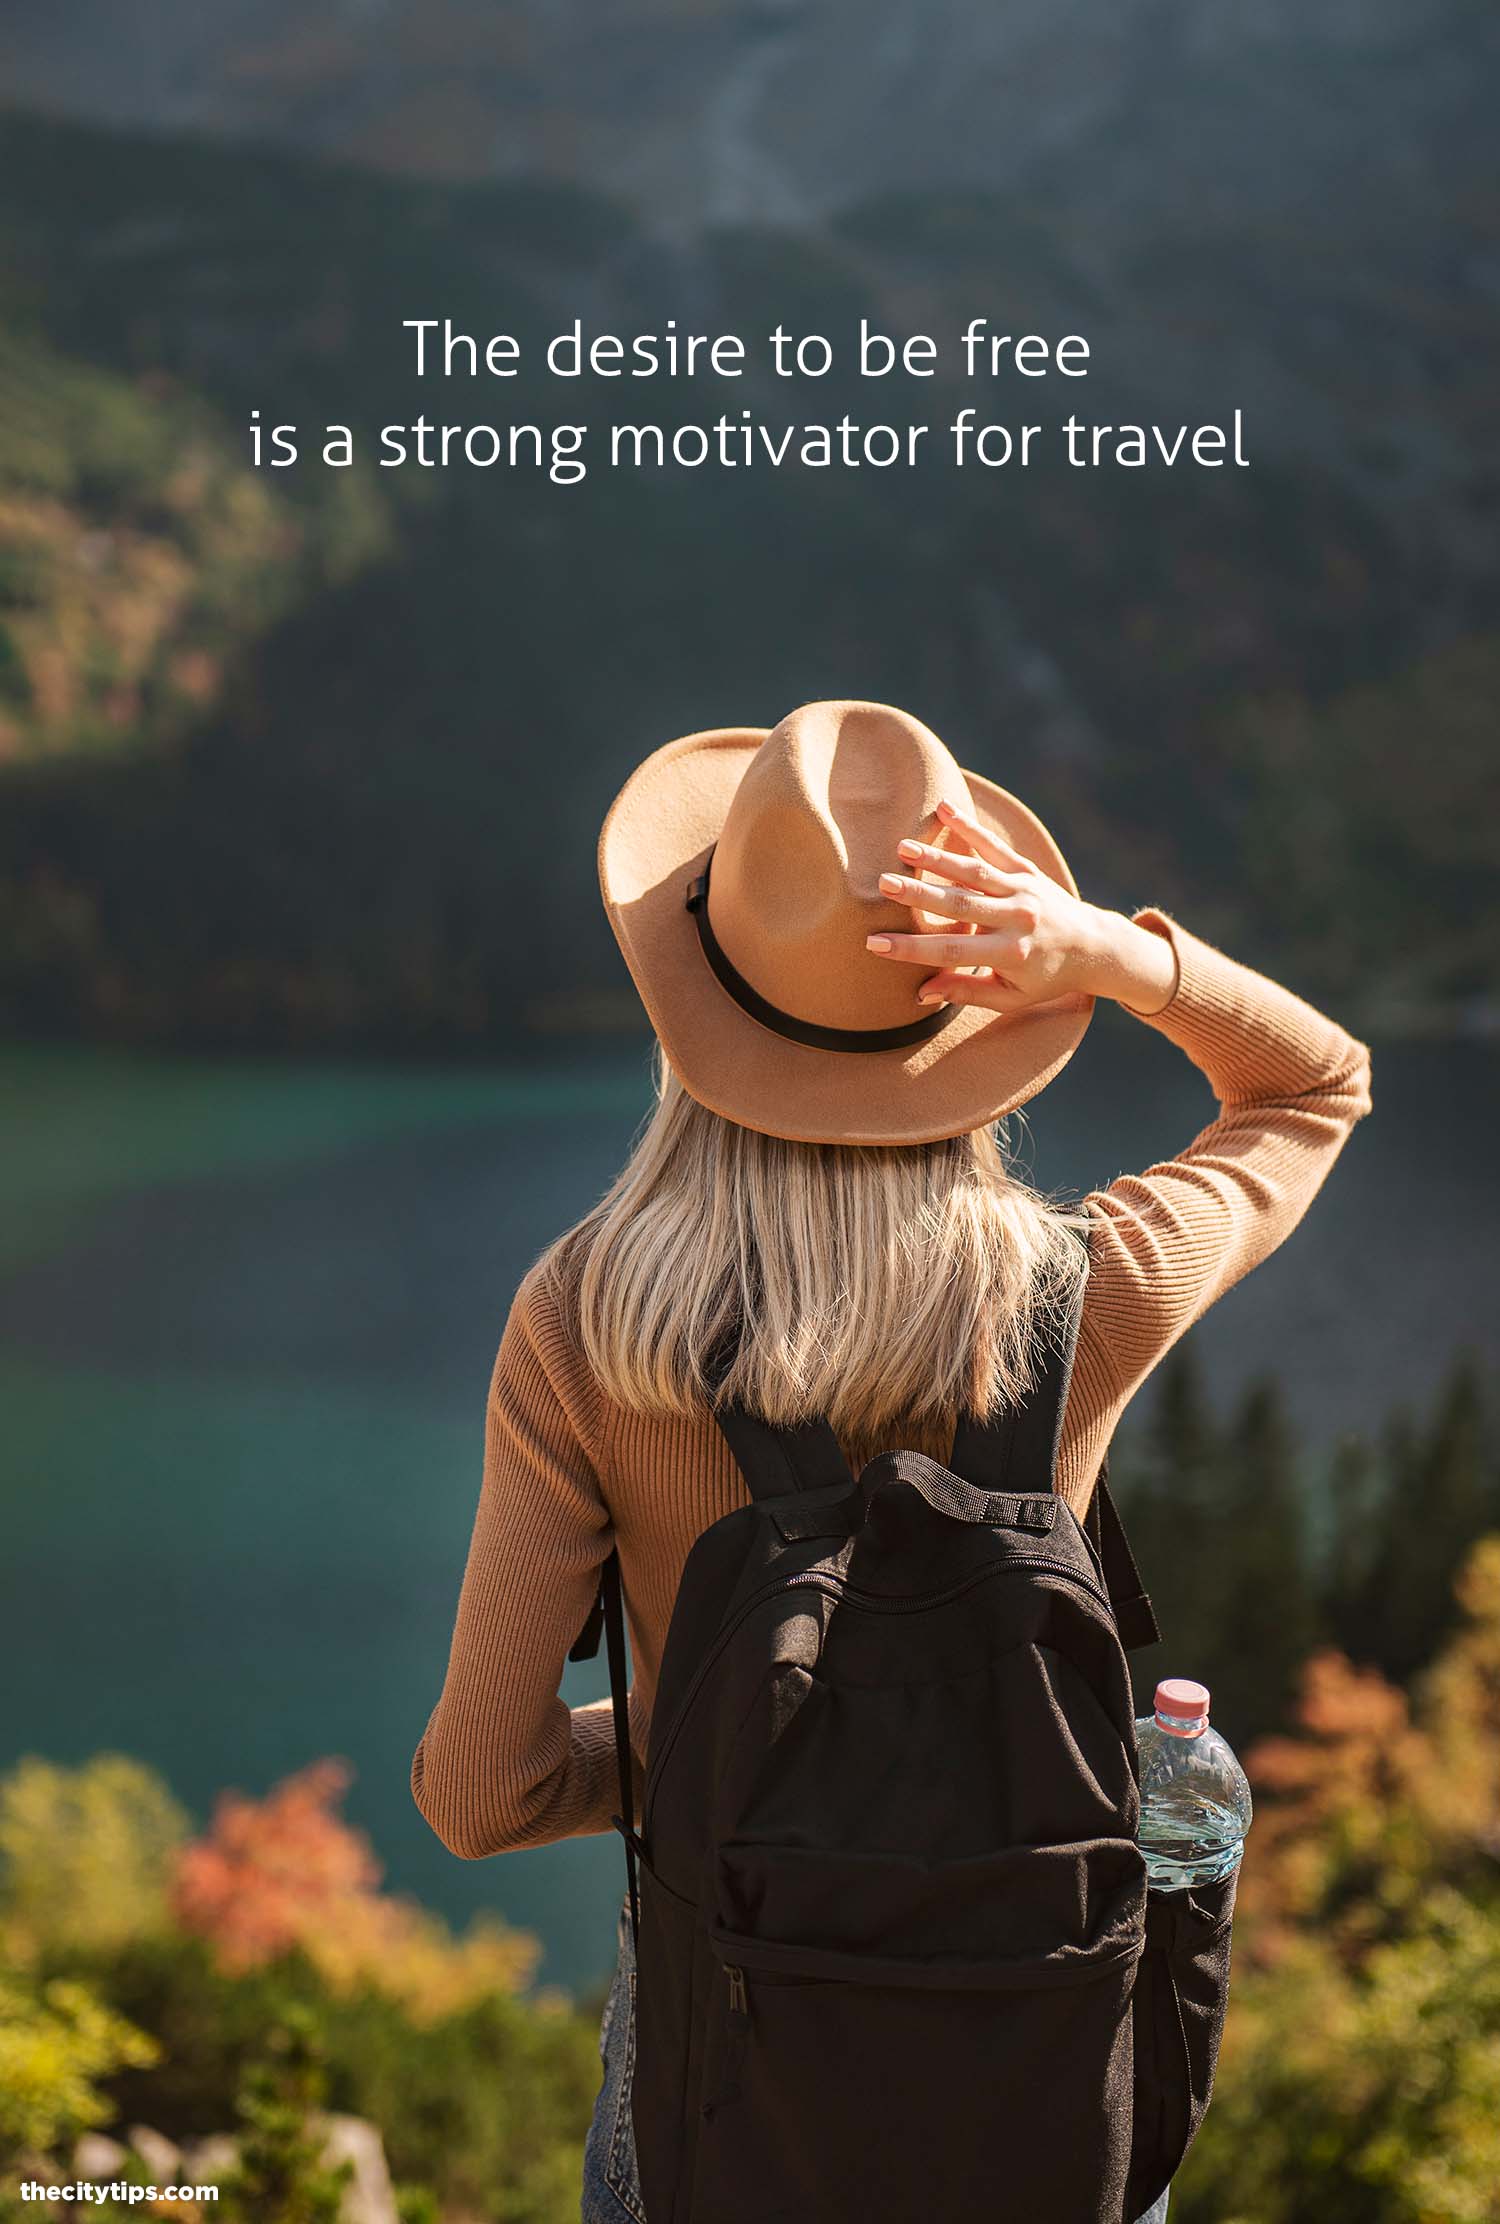 "The desire to be free is a strong motivator for travel."